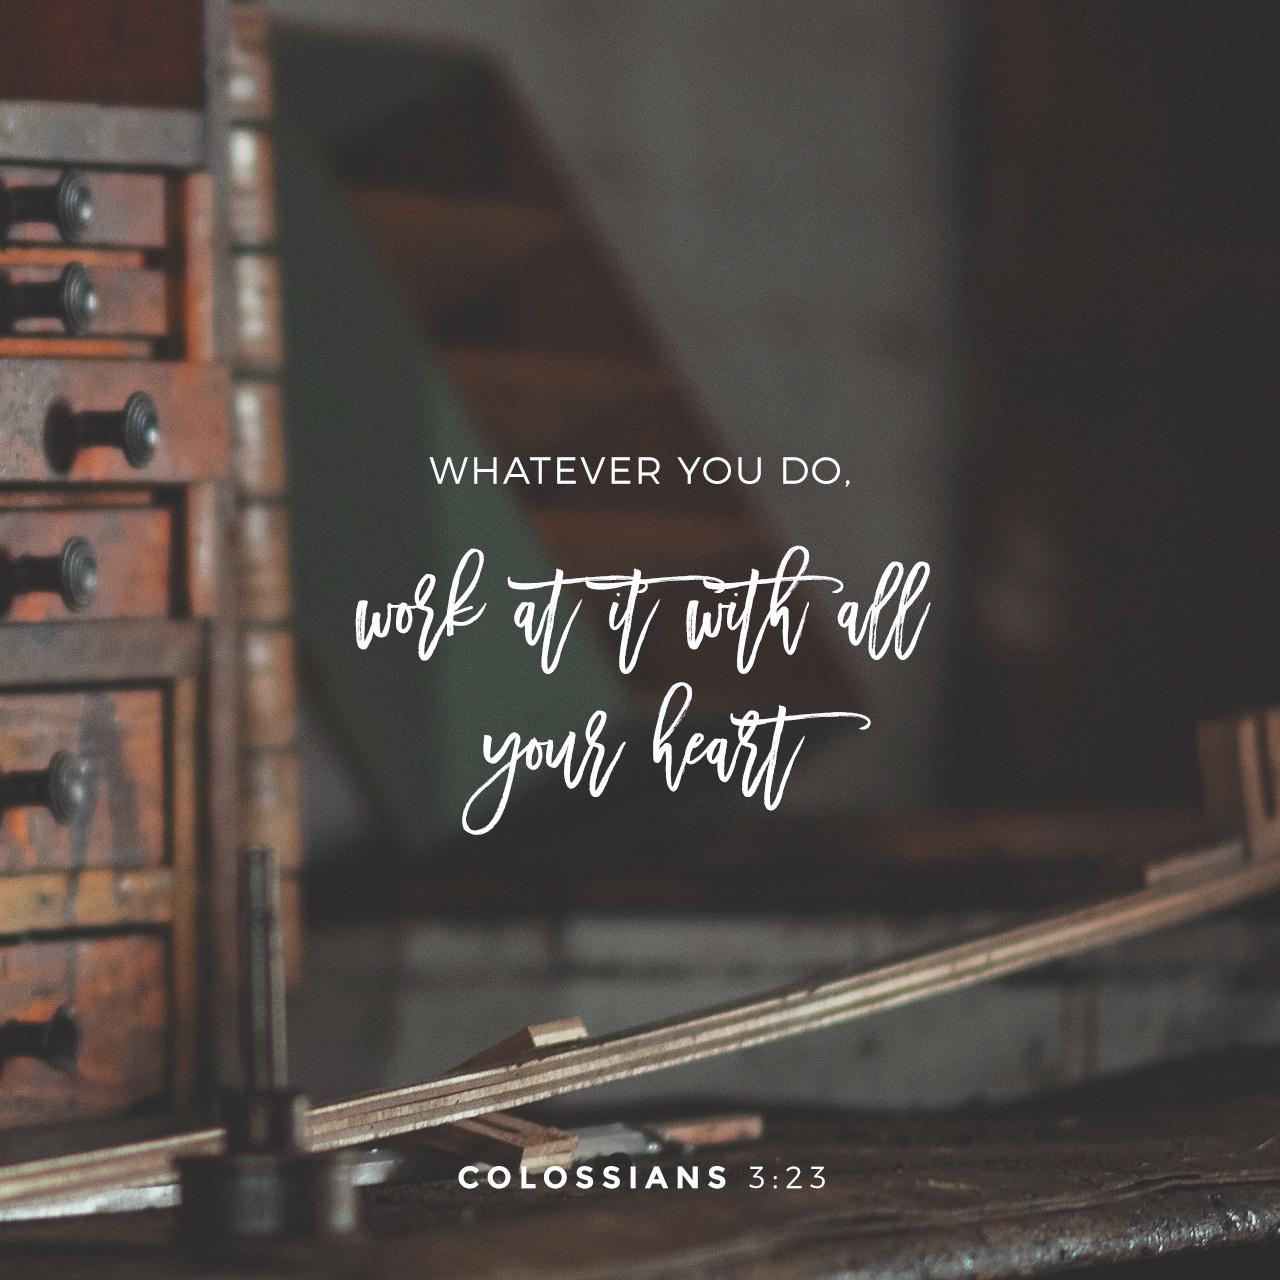 Colossians 3:23 Work willingly at whatever you do, as though you